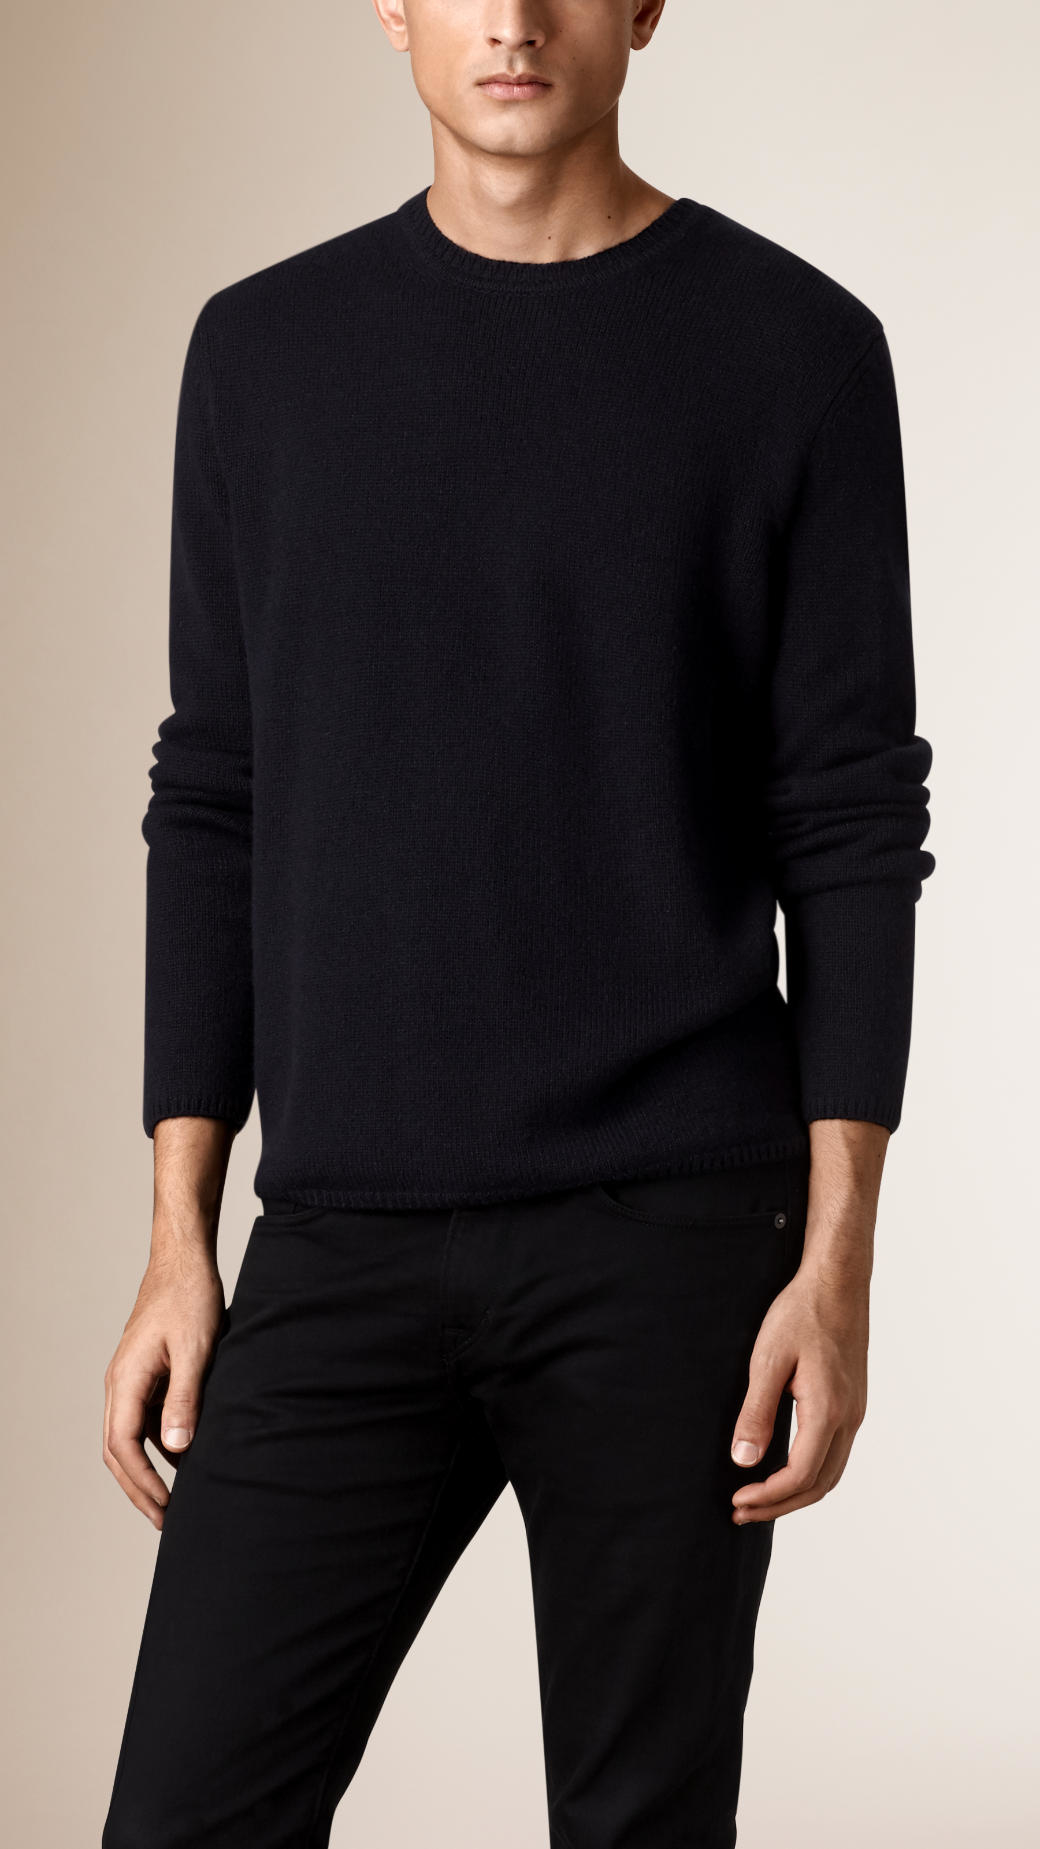 Lyst - Burberry Lightweight Crew Neck Cashmere Sweater Navy in Blue for Men